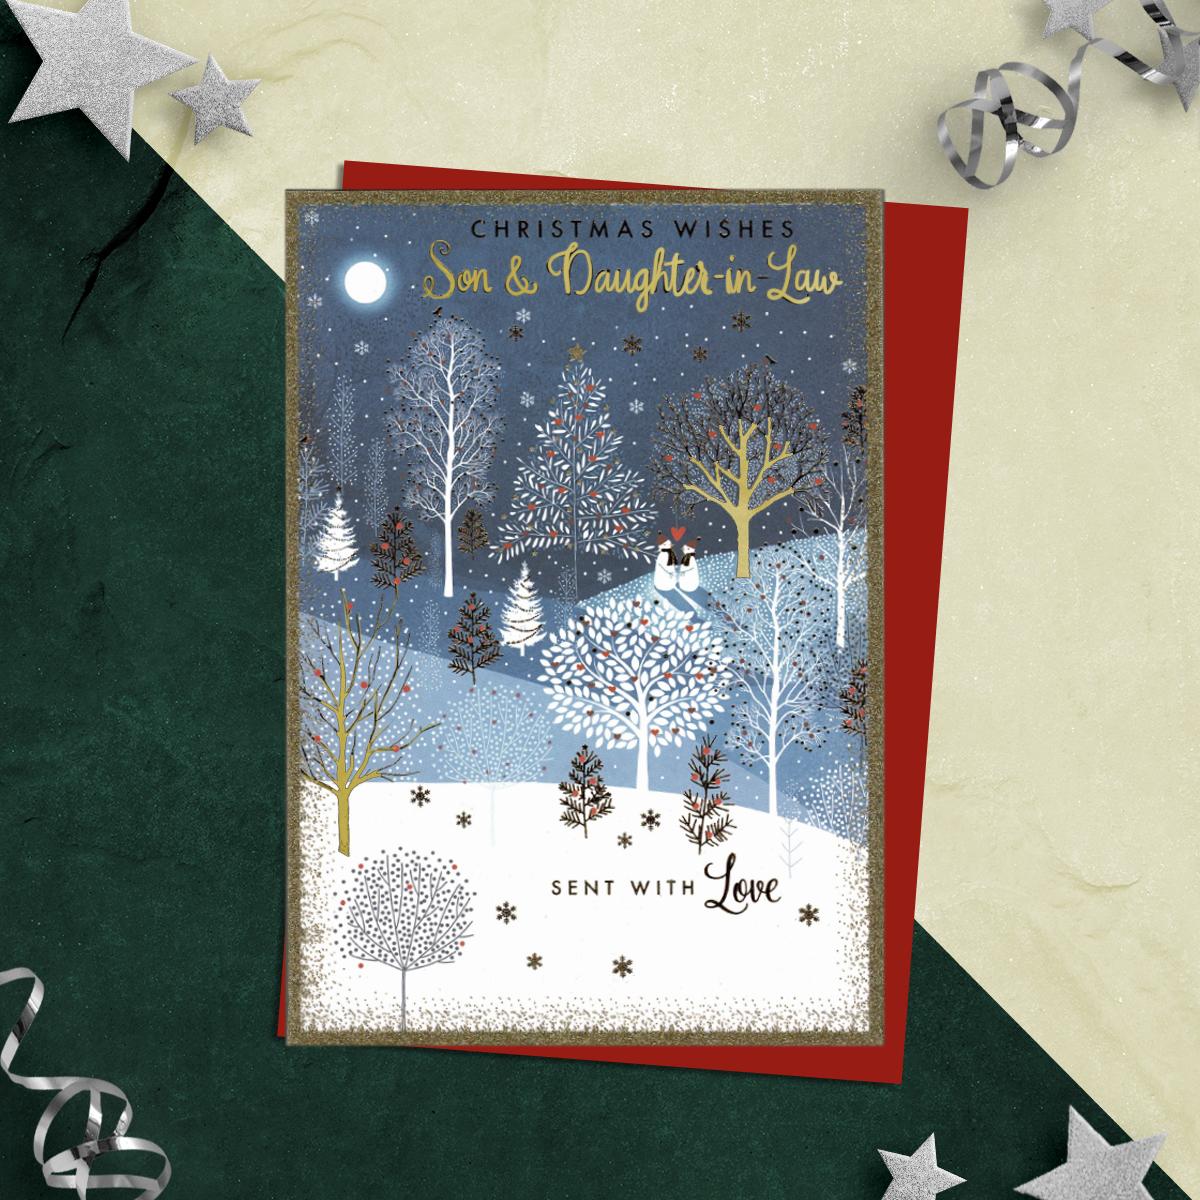 Christmas Wishes Son & Daughter In Law Sent With Love Featuring A Snowy Forest Scene Enhanced With Gol Foil Trees And Glitter. Two Snowmen With A Red Heart Above Them Complete This Design. finished With Red Envelope, Printed Insert And Verse